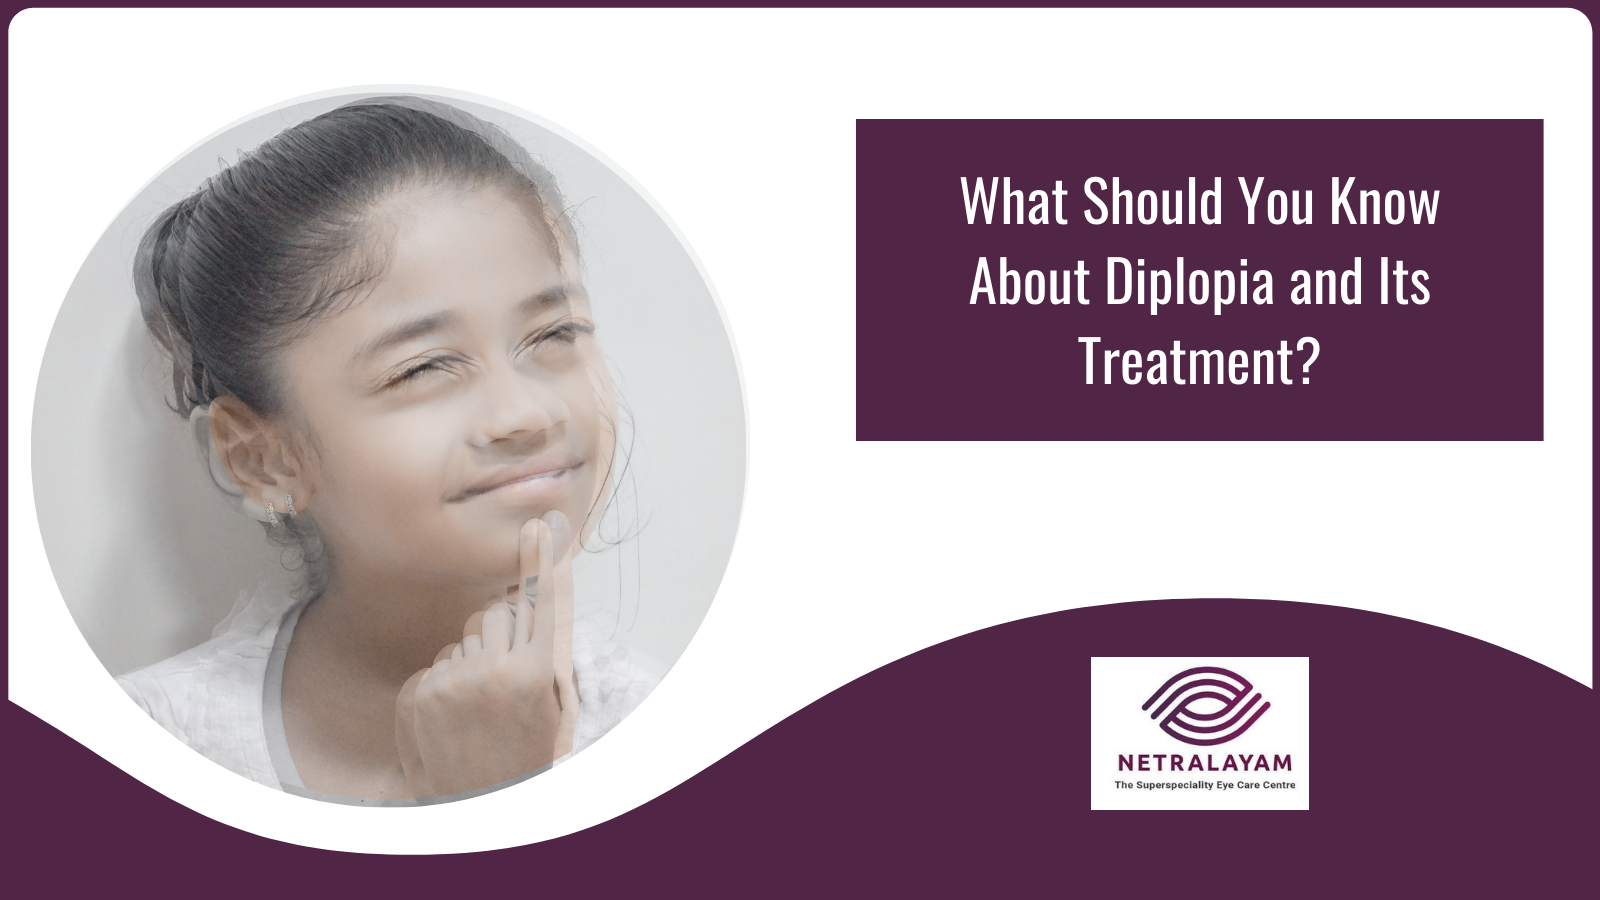 What Should You Know About Diplopia and Its Treatment?